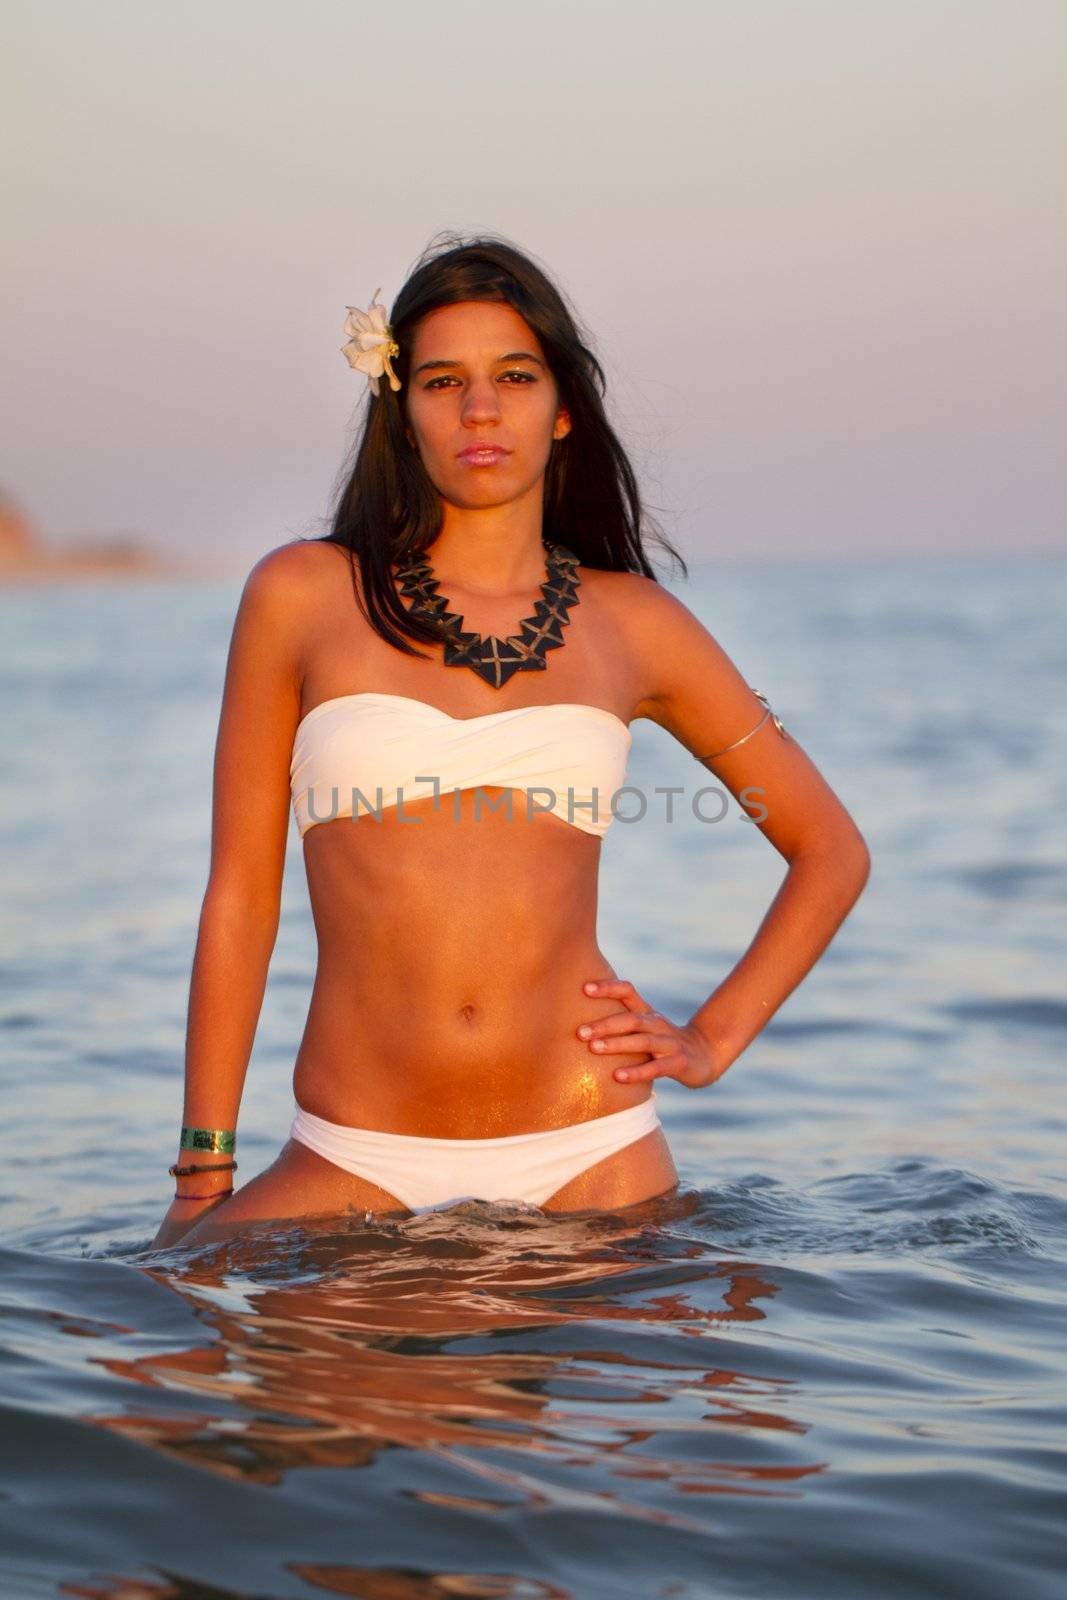 View of a beautiful young girl with a bikini standing on the shore.